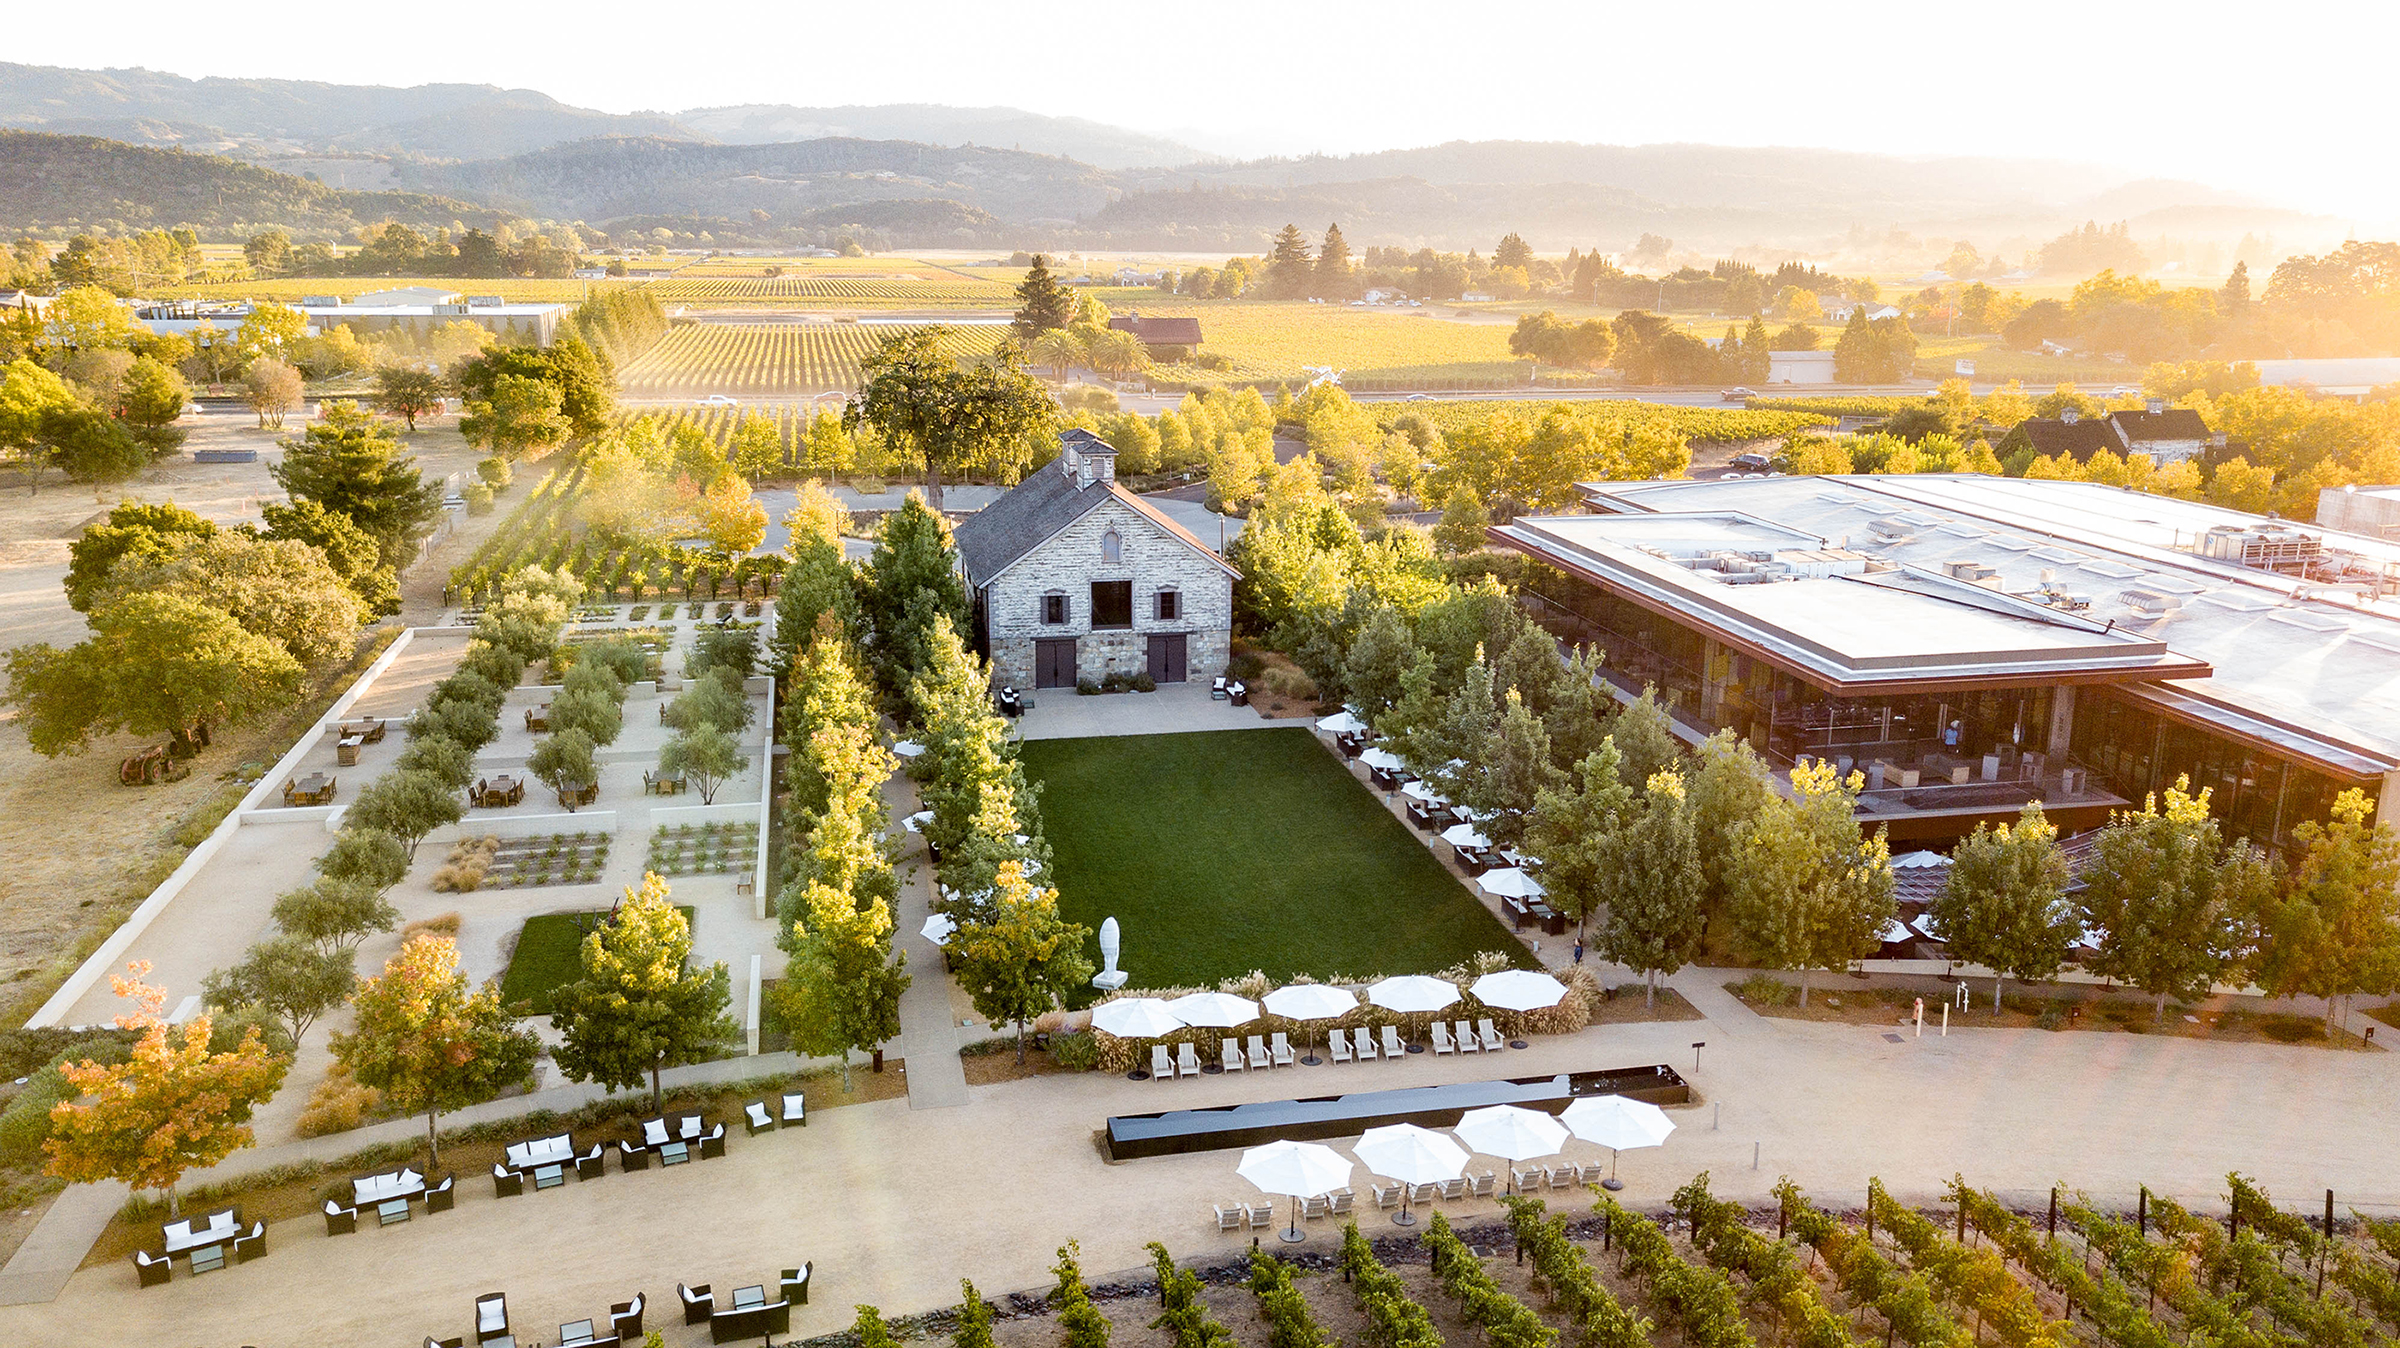 HALL Family Wines – A Napa Valley Institution